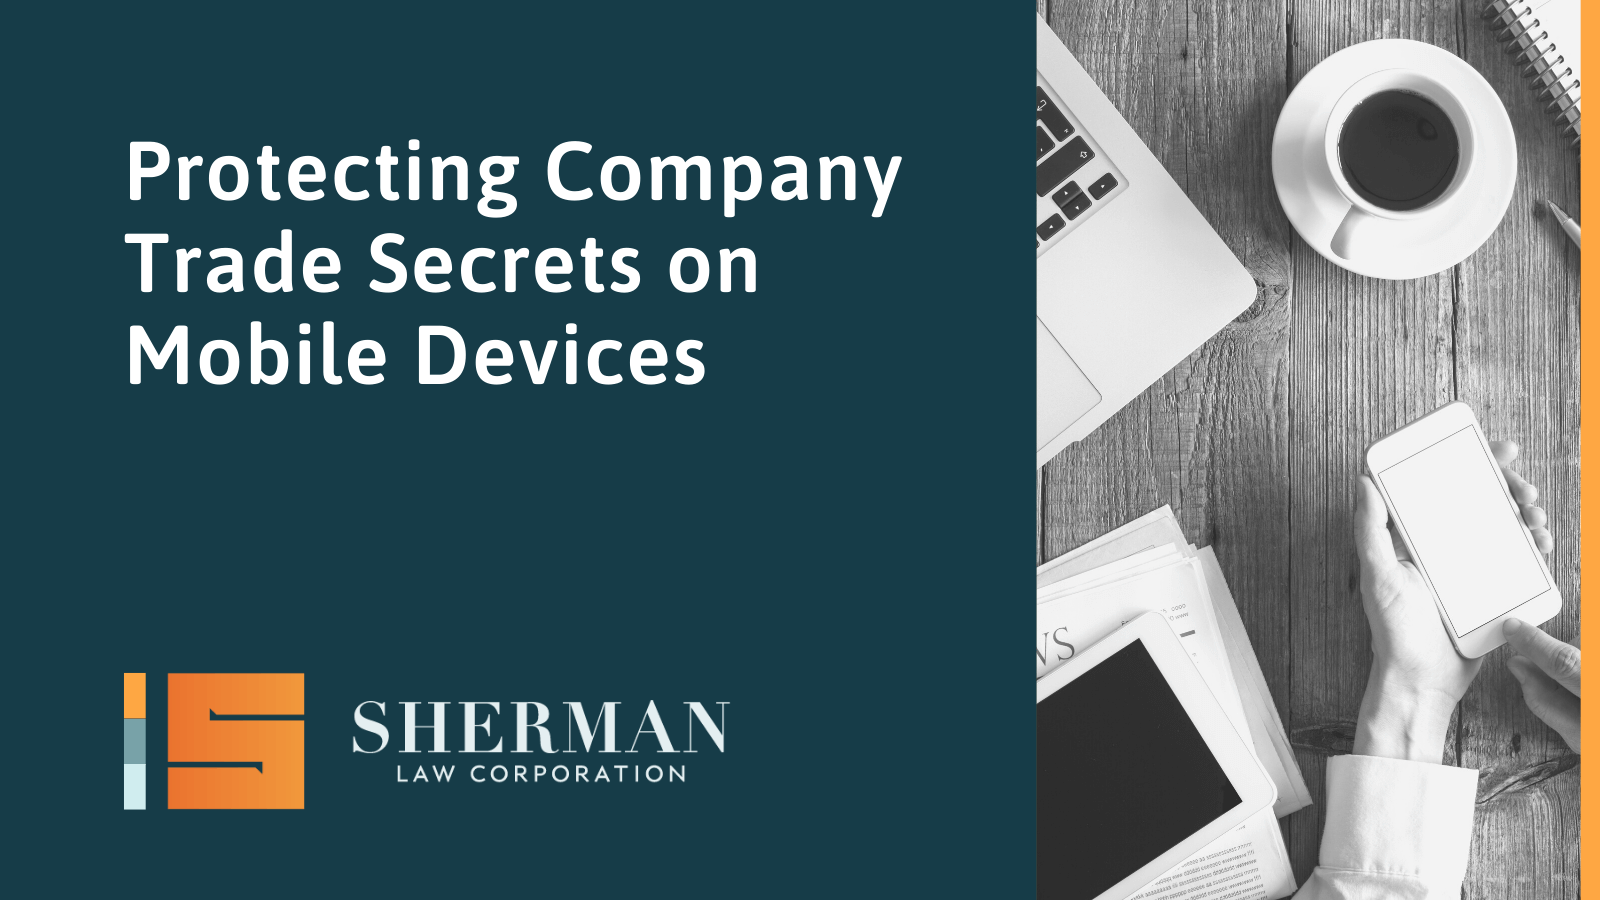 Protecting Company Trade Secrets on Mobile Devices- sherman law corporation